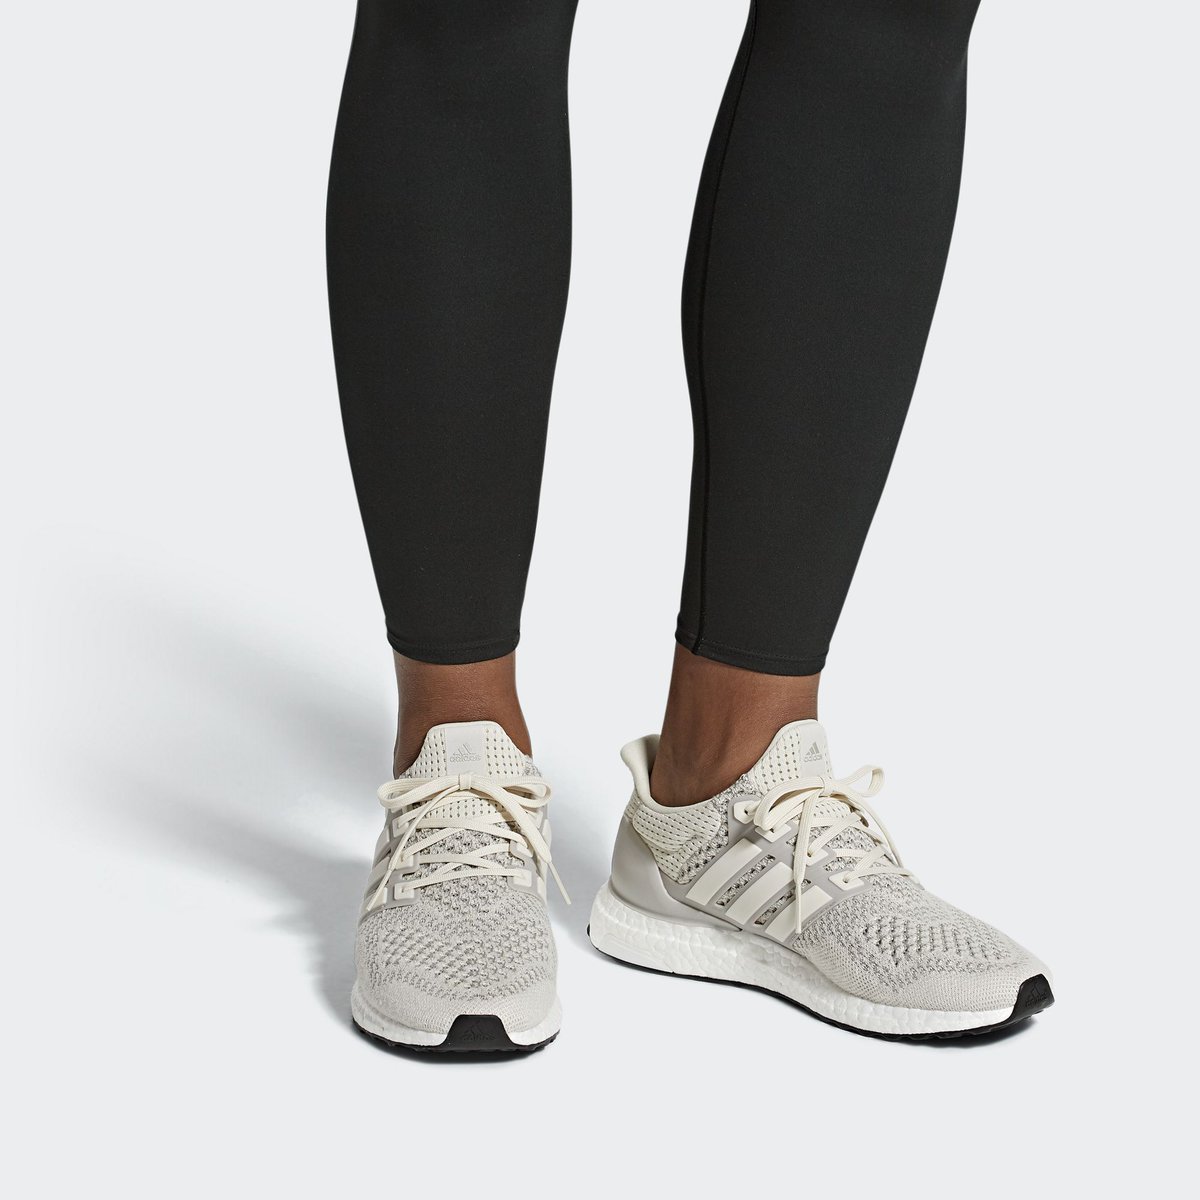 1 0 Cream Ultra Boost On Sale Up To 51 Off